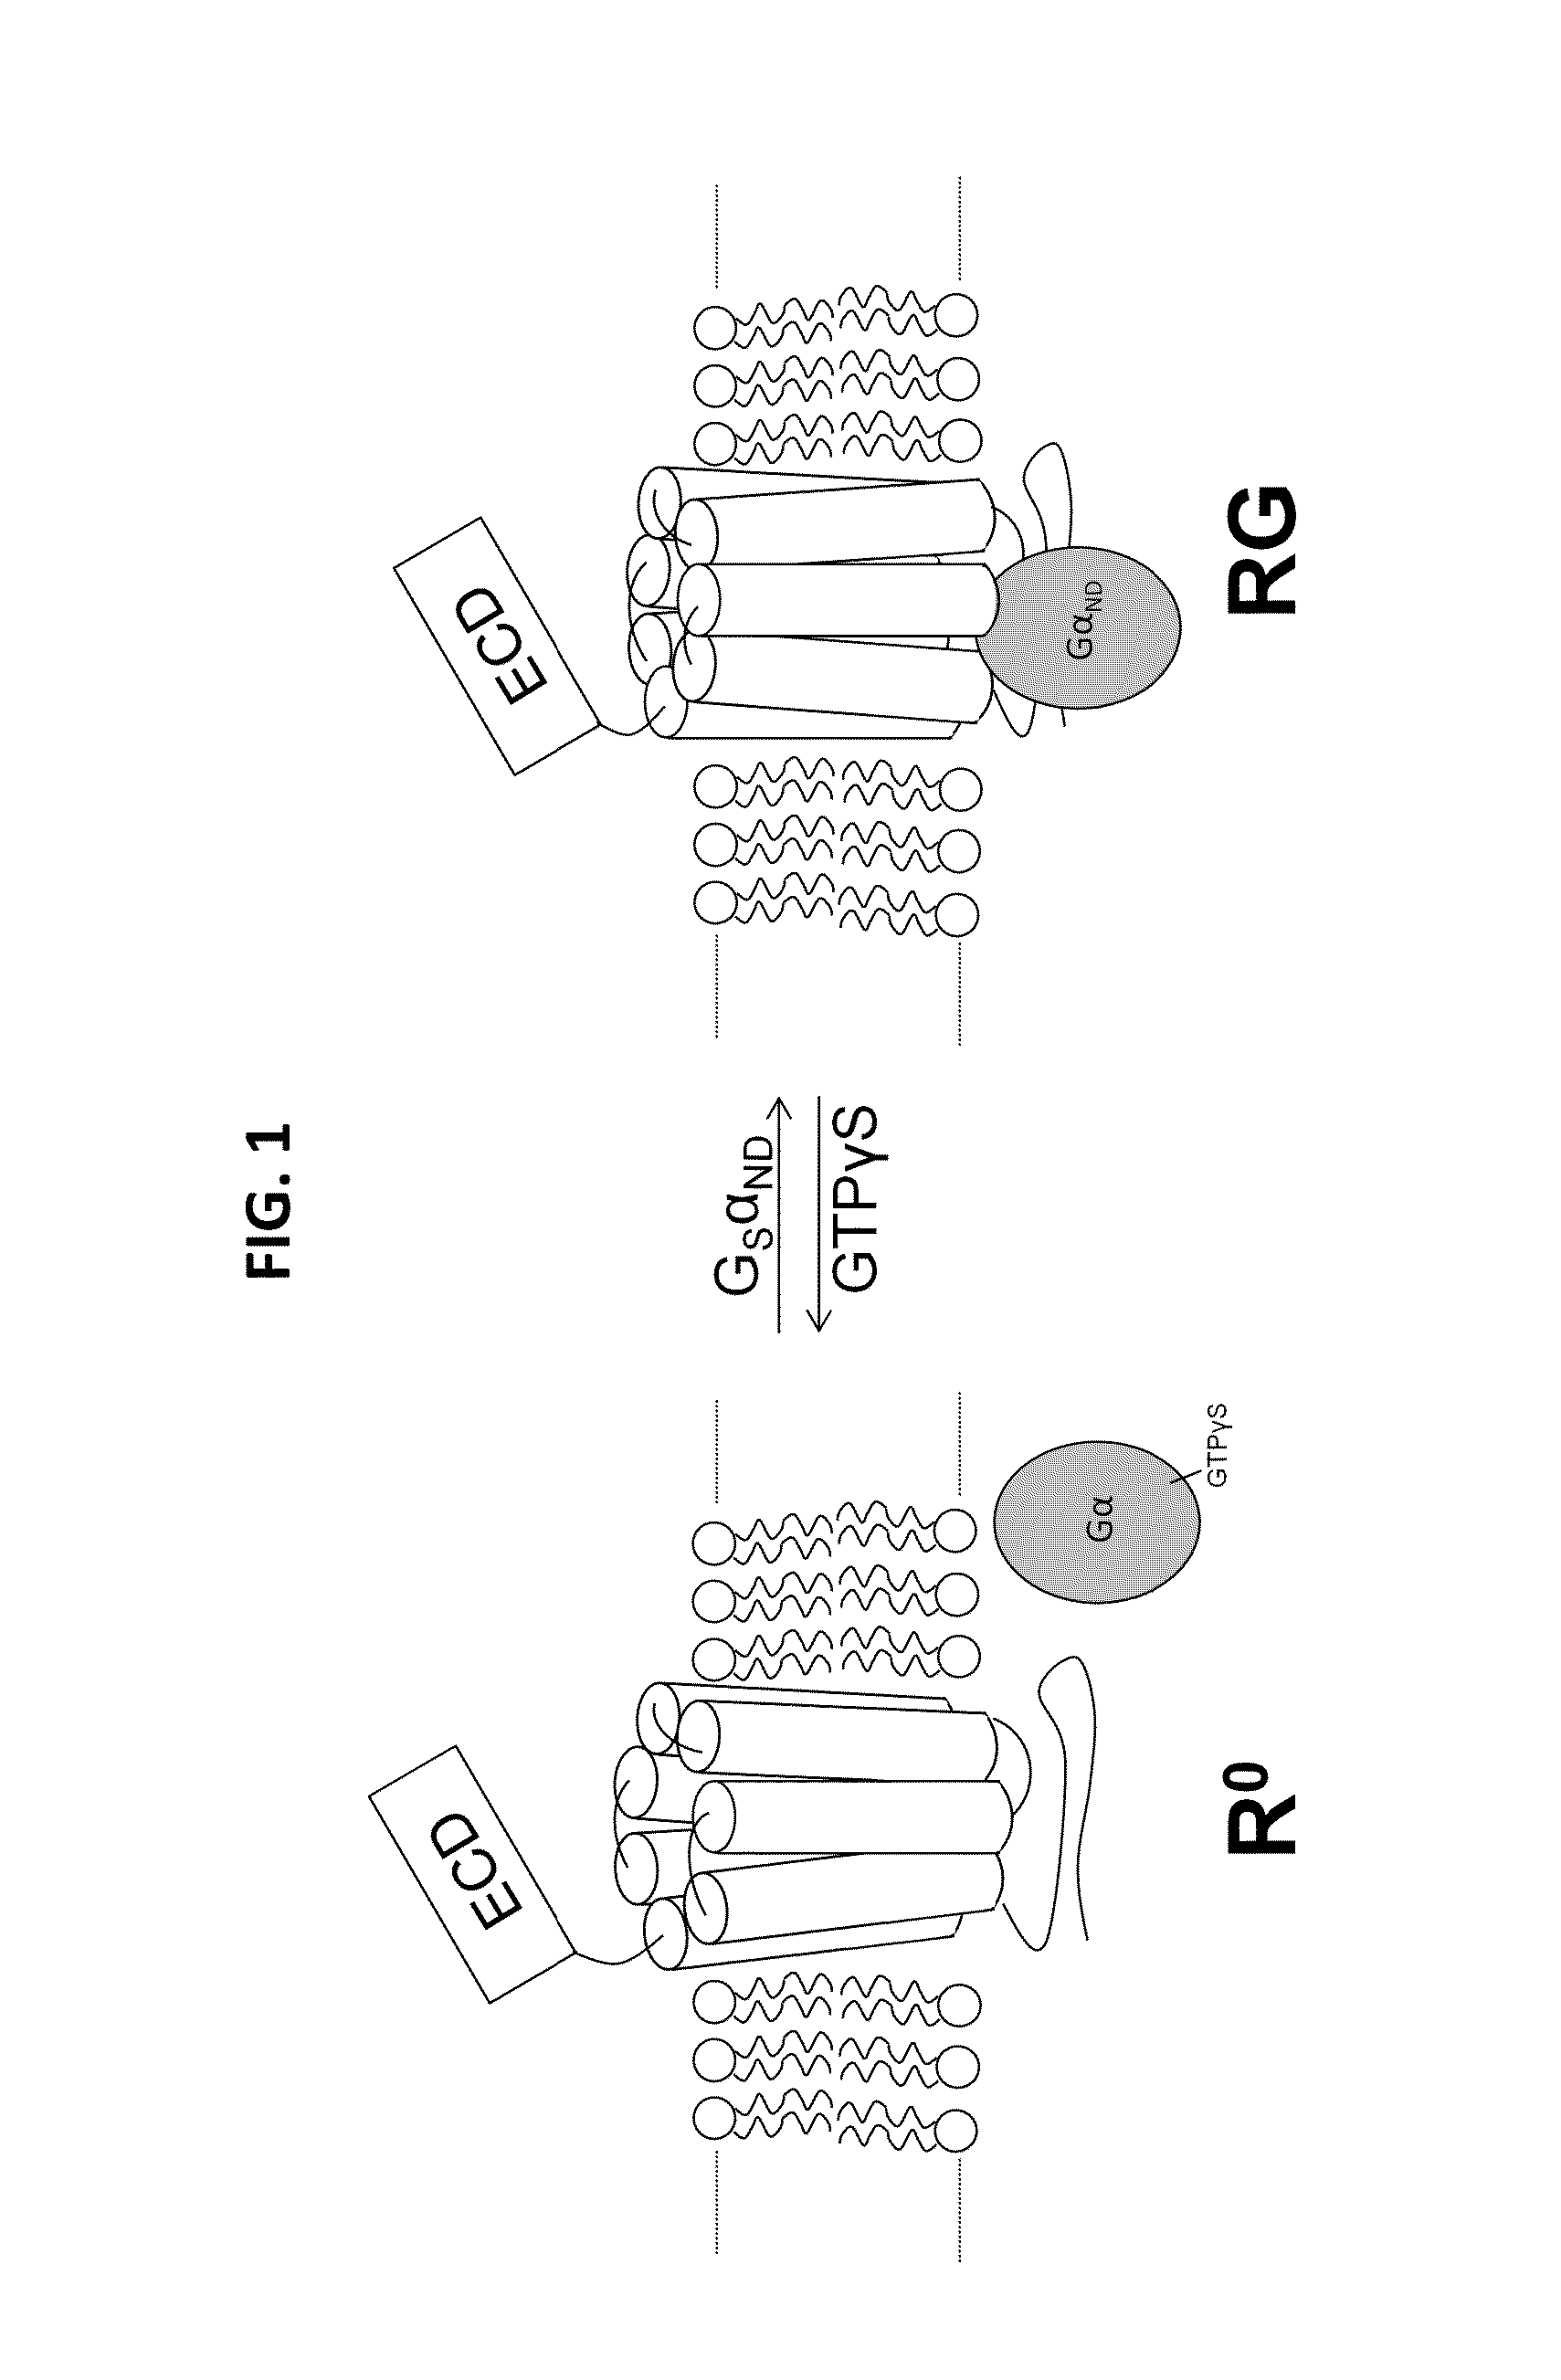 Alpha-/beta-polypeptide analogs of parathyroid hormone (PTH) and method of using same